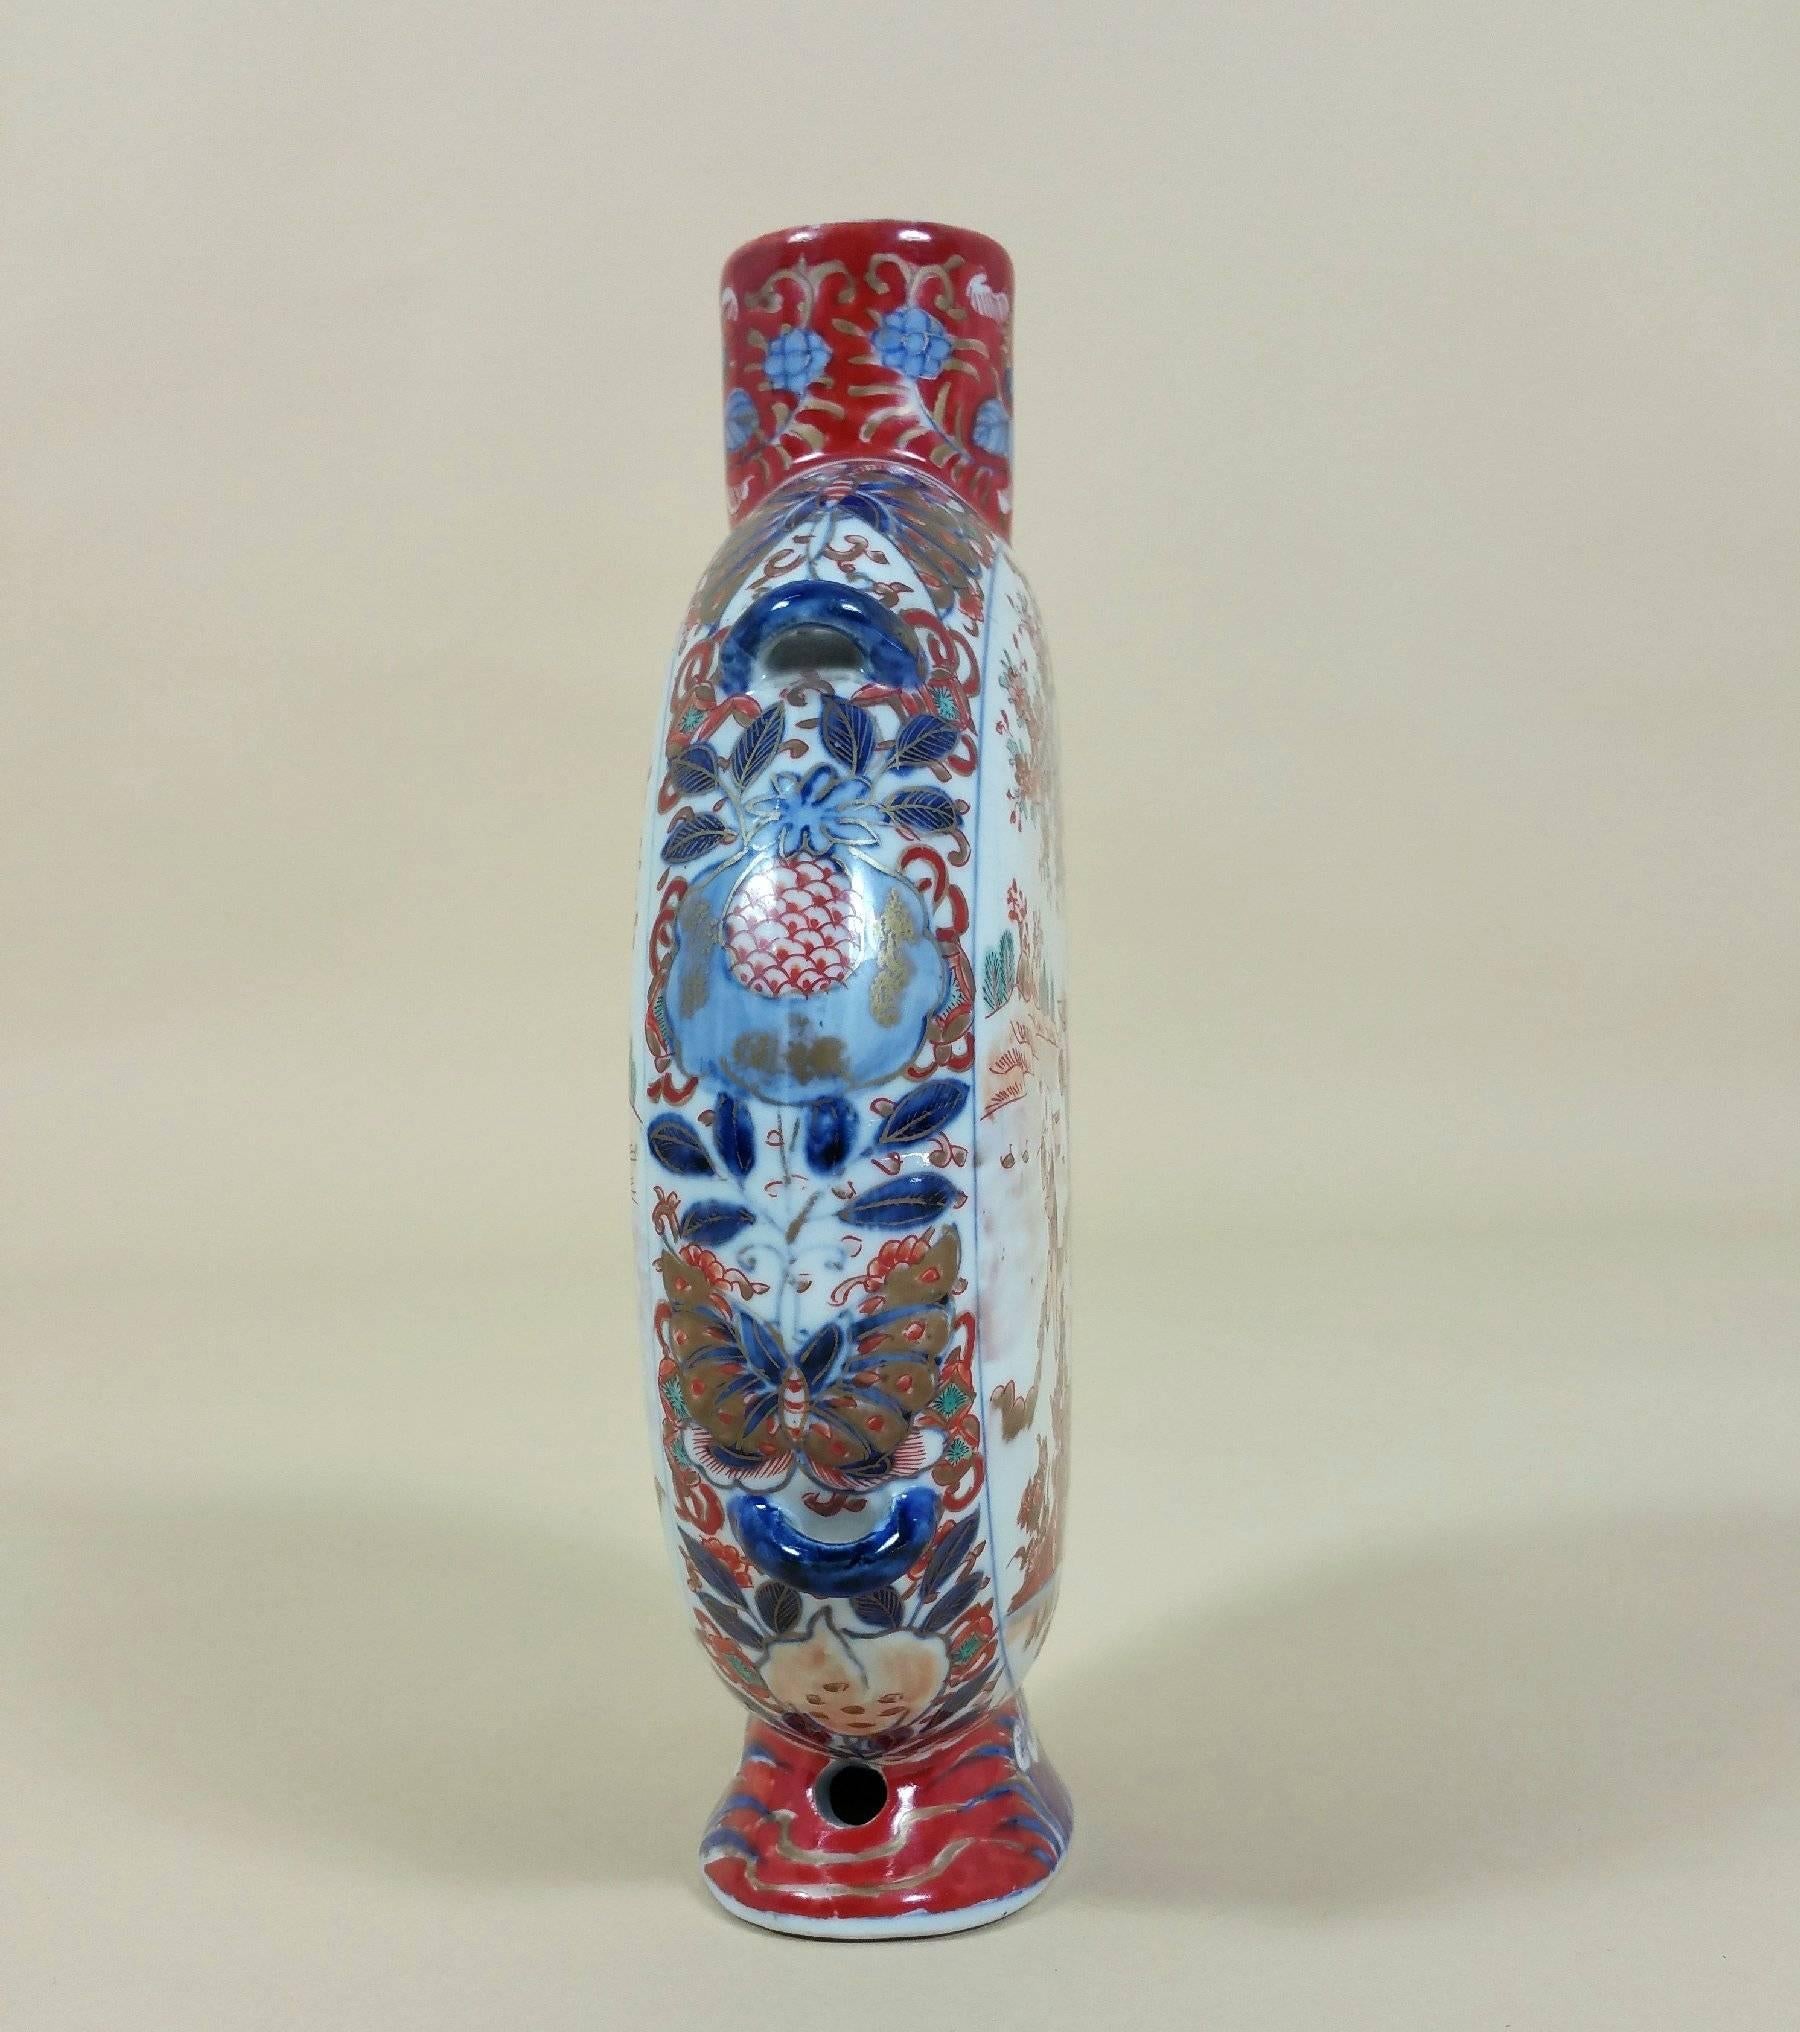 This lovely Japanese Koransha pottery moon flask is painted in the Imari palette depicting whimsical characters in an outdoor setting around cherry blossom foliage. Koransha was founded as a maker and exporter of Arita porcelain in 1875 by Eizaemon